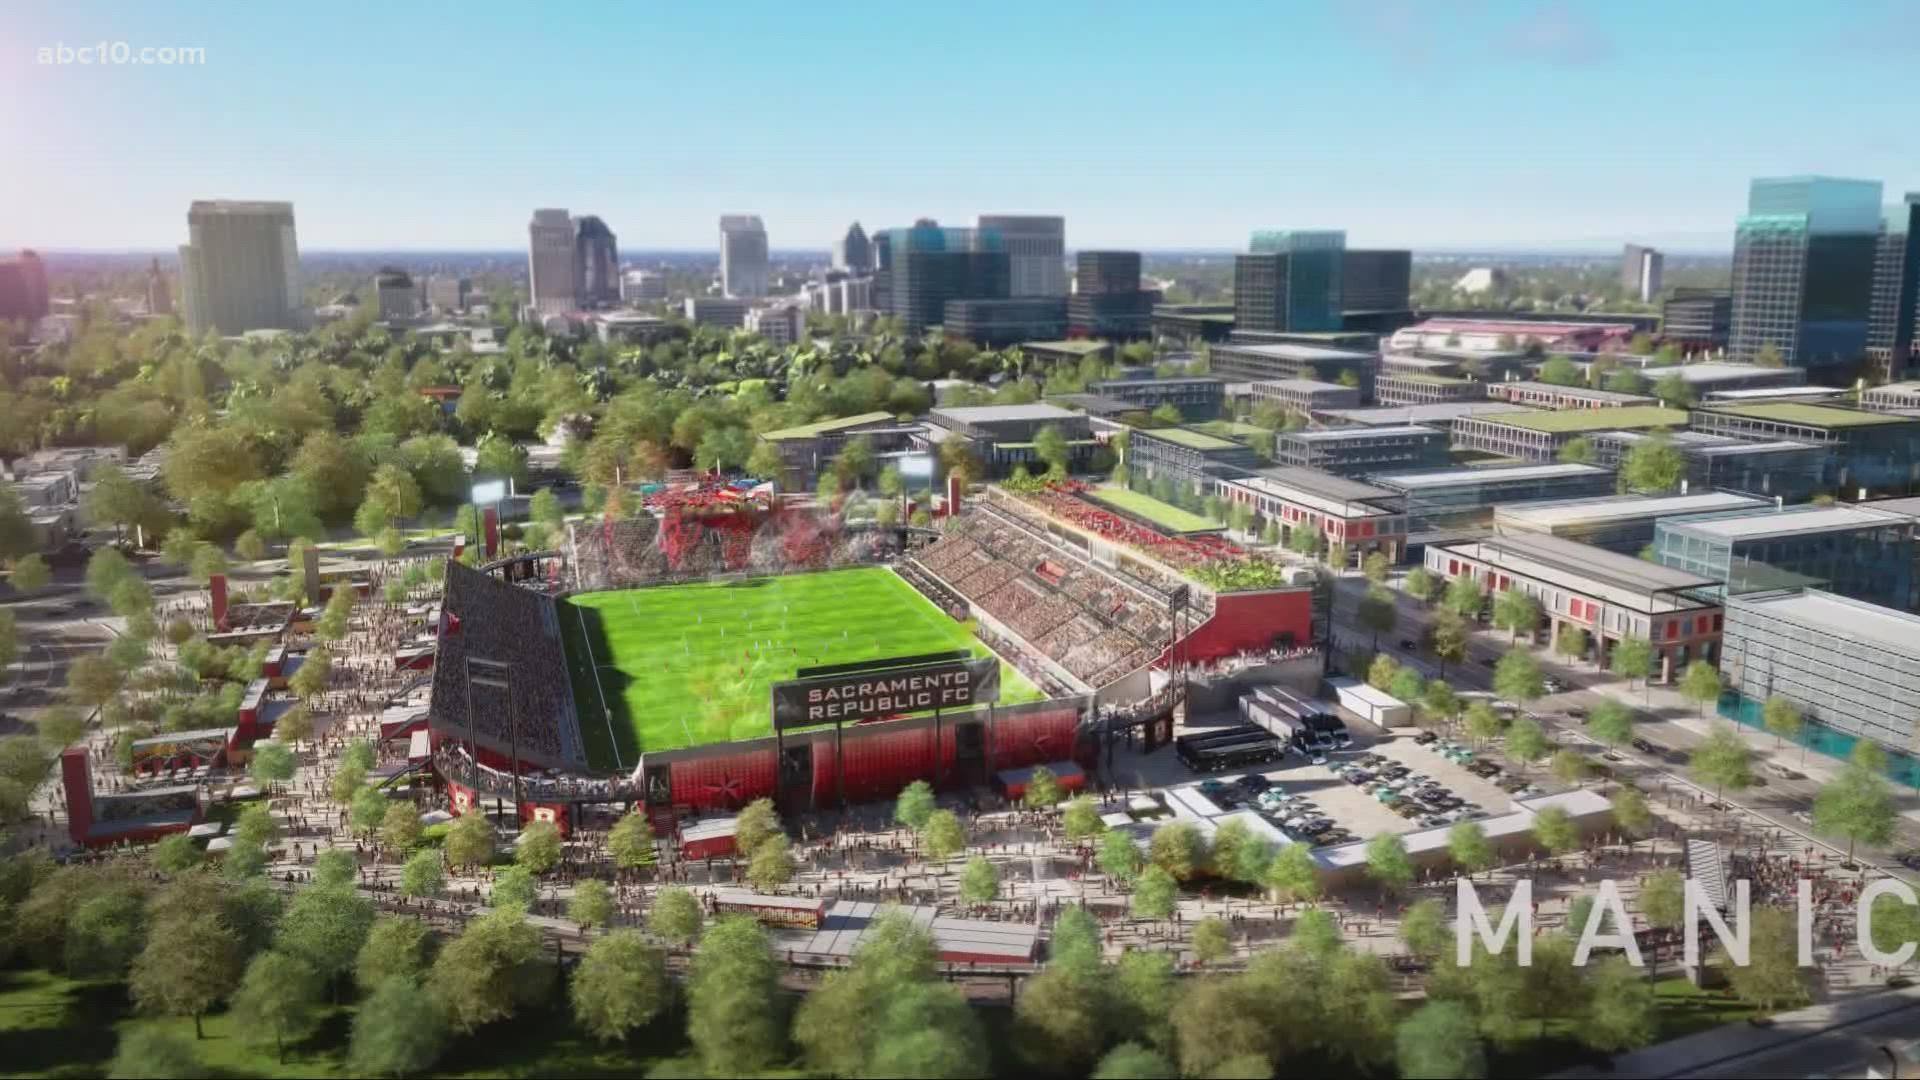 The new plan includes additional details on what the stadium hopes to host, as well as a new artist rendering of the venue.